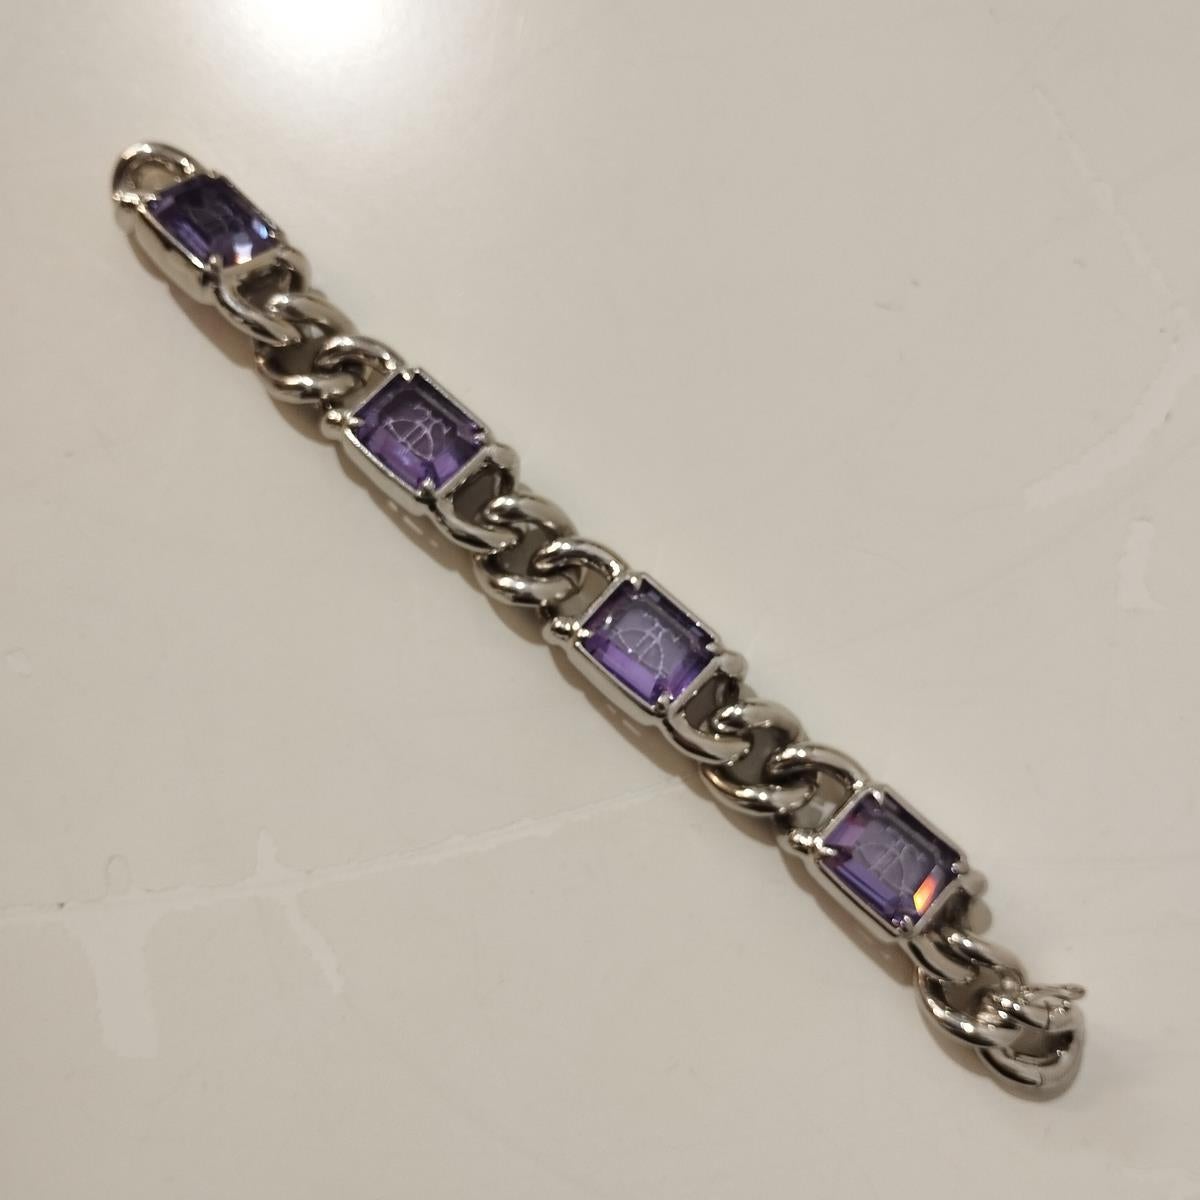 Very chic and iconic Vivienne Westwood bracelet
Metal chain
Purple crystals
VW Logo
Total lenght cm 20 (7,8 inches)
With pouch
Worldwide express shipping included in the price 